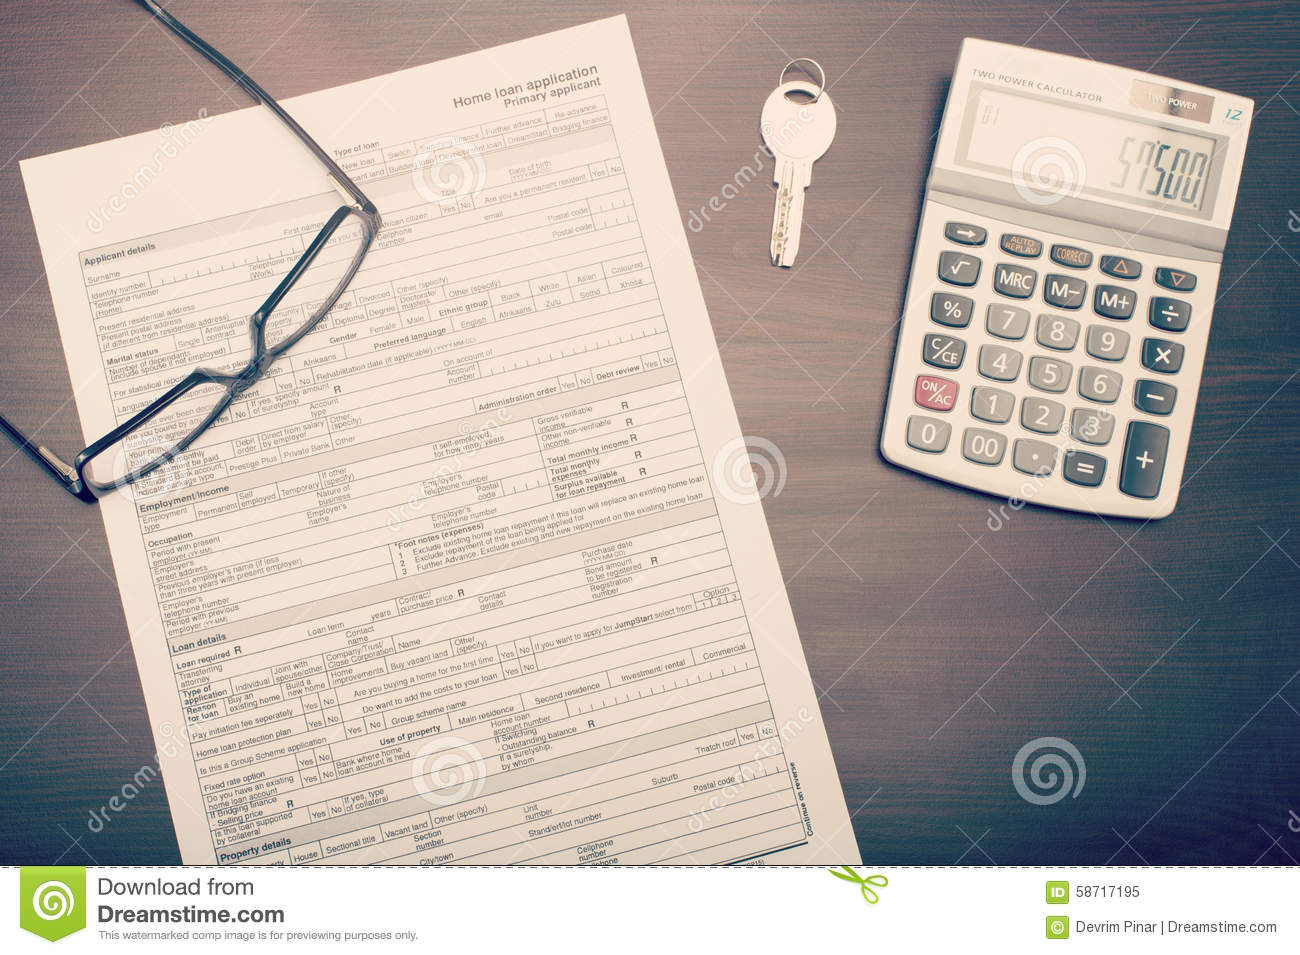 Home Loan Application Form On Desk With Glasses Key And Calculator